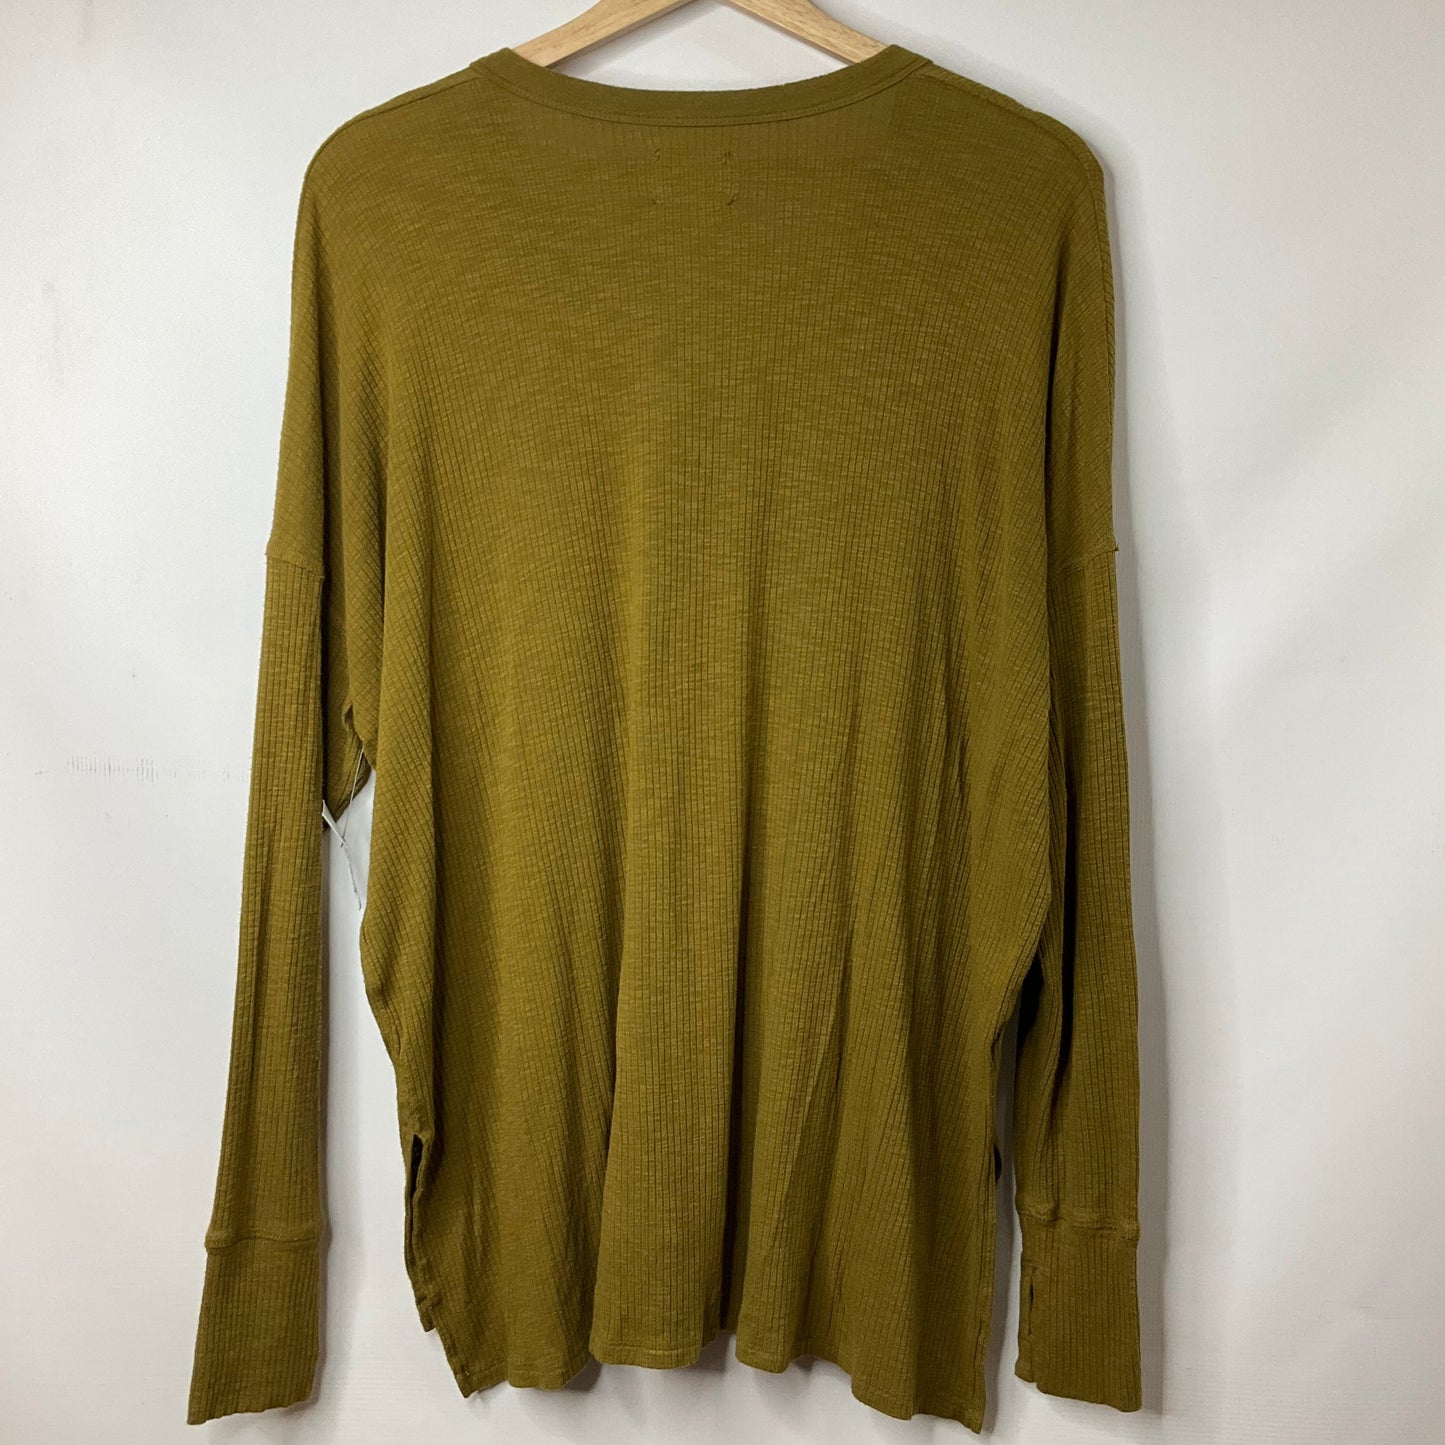 Green Top Long Sleeve Aerie, Size M